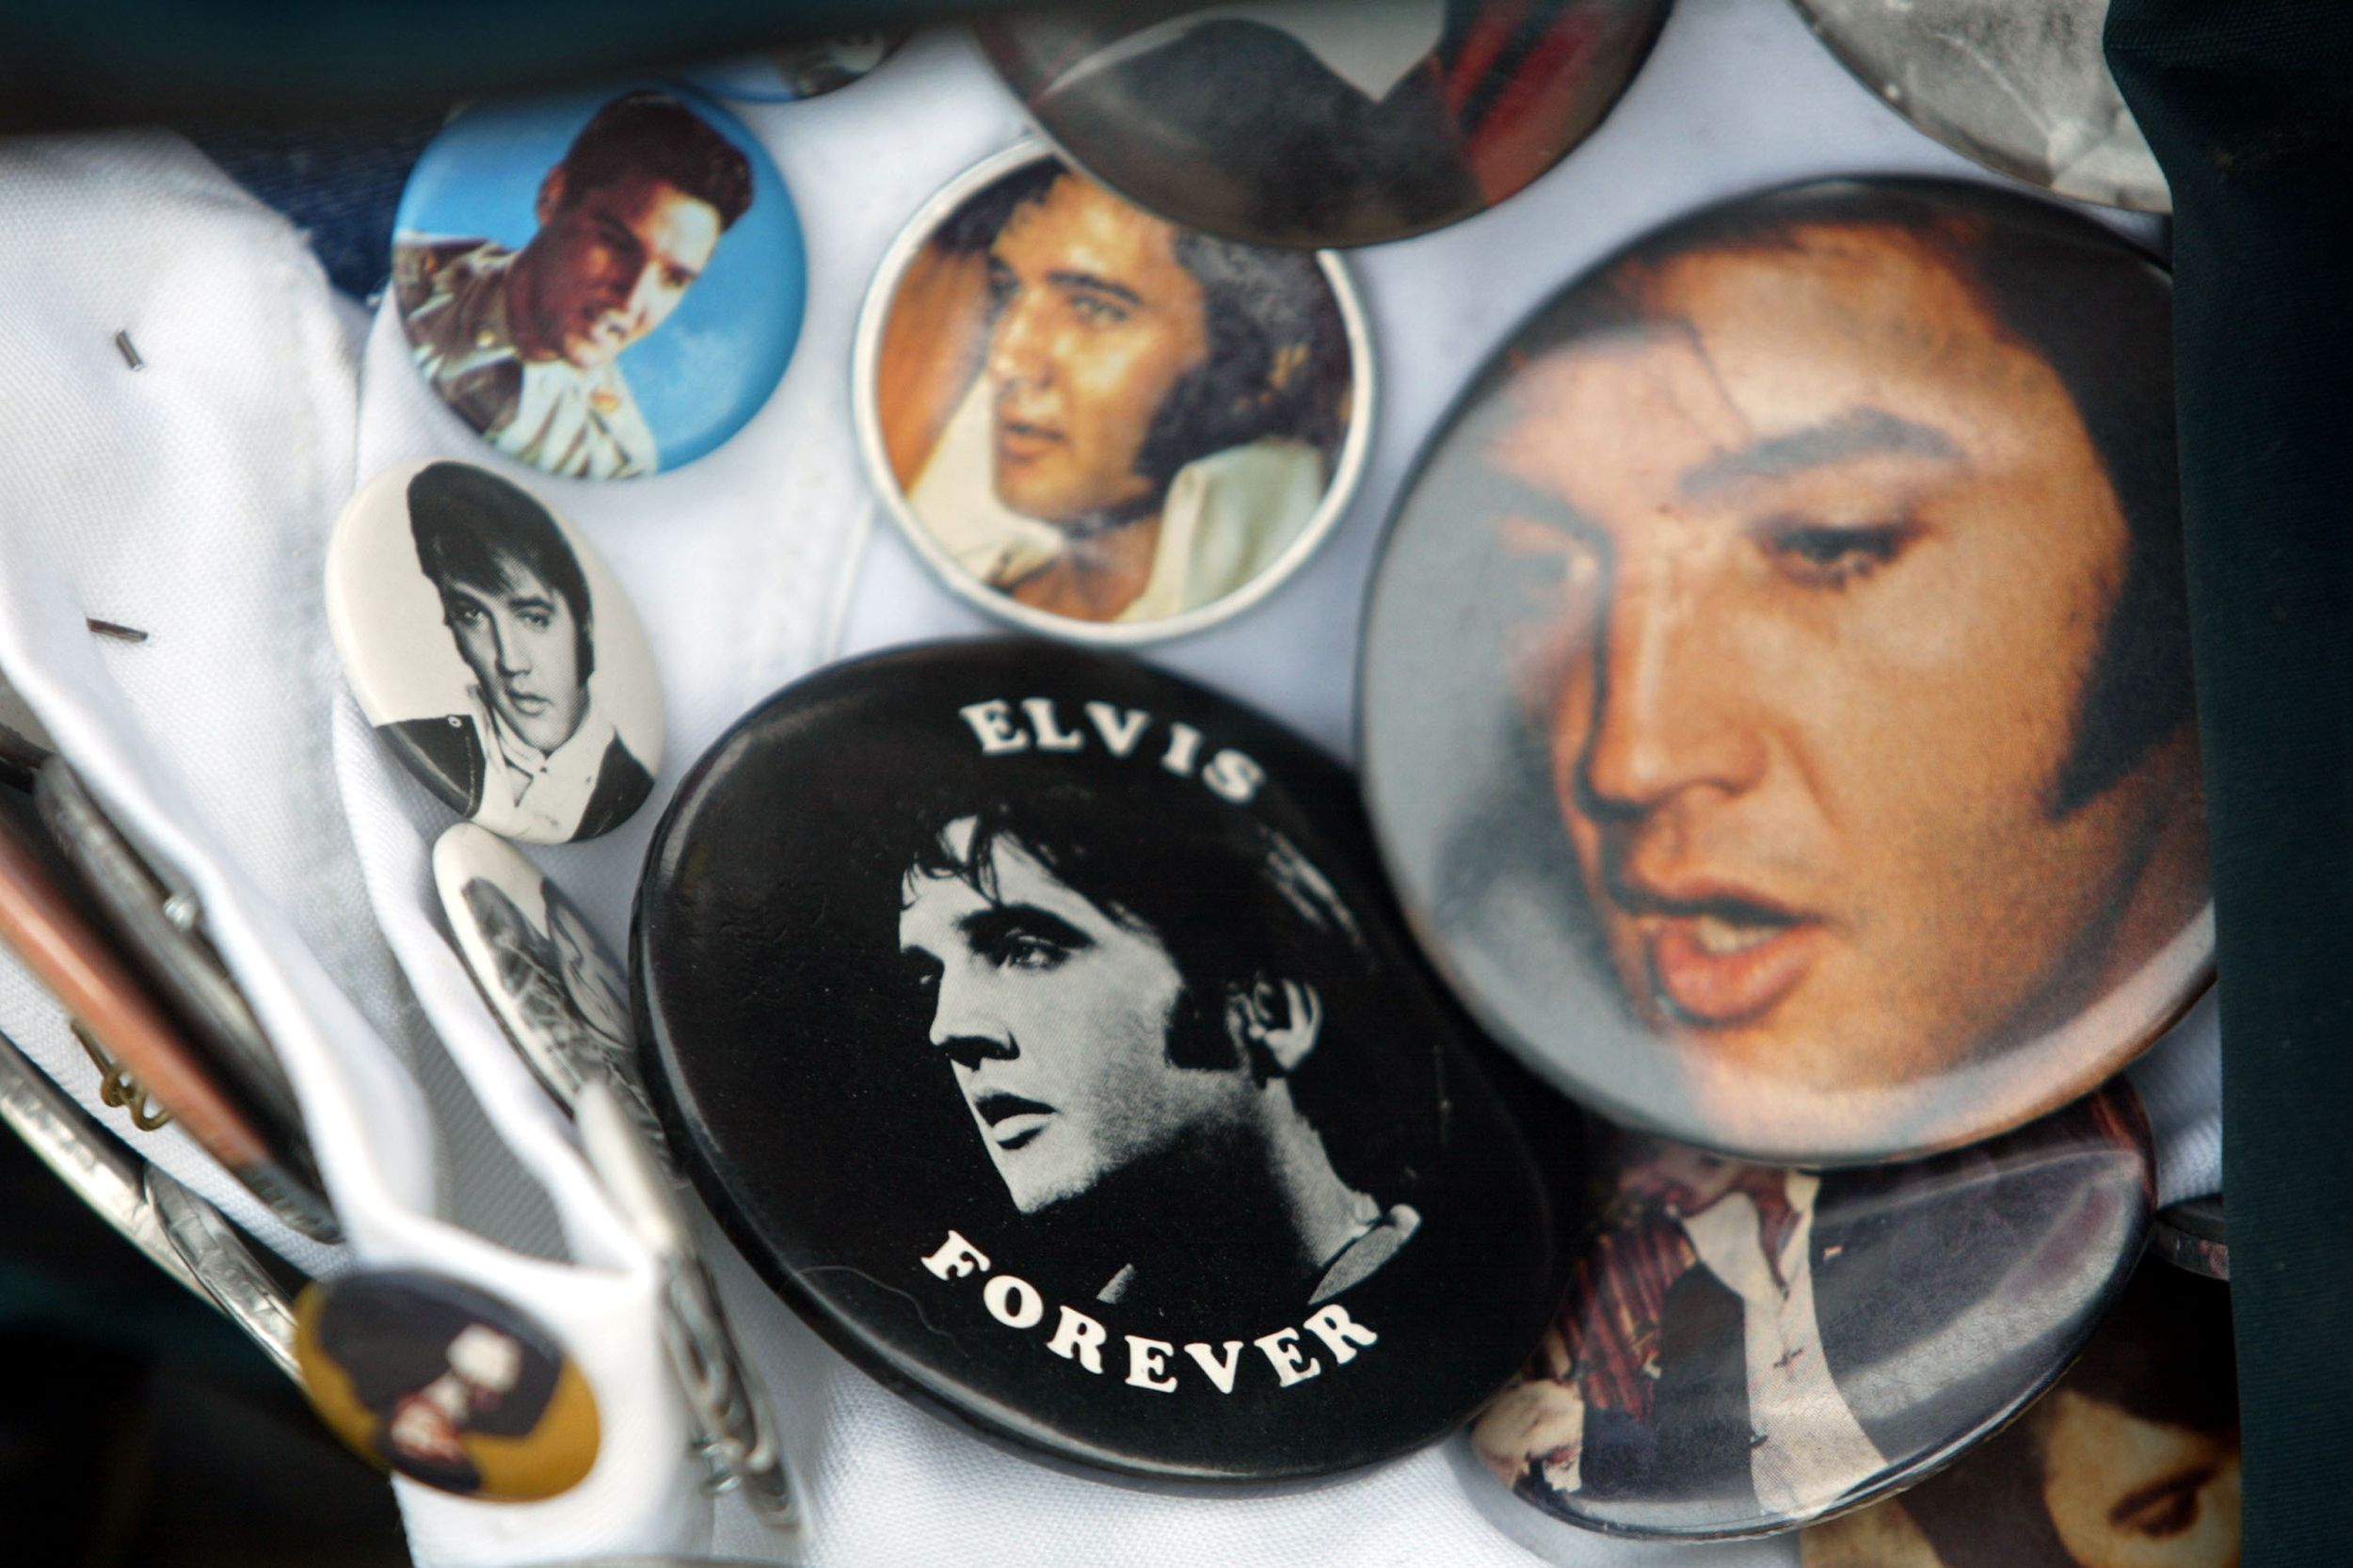 <p>Elvis Presley, who died on Aug. 16, 1977, would have been 87 years old this year, and whether you're a devoted fan of Elvis or simply fascinated by the mystique surrounding the King of Rock 'n' Roll, when it comes to <a href="https://blog.cheapism.com/song-about-places/">legendary musical destinations</a>, there are few places as iconic as Graceland, <a href="https://blog.cheapism.com/famous-homes-you-can-tour/">Elvis' former home-turned museum outside of Memphis</a>. But how much do you really know about this tourist attraction that was named a National Historic Landmark in 2006? And do you know it well enough to notice the difference between the real deal and the Australian replica made for the new "Elvis" movie? Read on for fun facts about the half-paradise, half-theme park that Elvis created for himself. </p><p><b>Try <a href="https://chrome.google.com/webstore/detail/cheapism-search-and-save/gfbmlcdfkpoiofencnmkkdcmklakicck?s=v1">Cheapism Search and Save</a></b><b>,</b> a new tool that lets you search the web and see the latest from Cheapism.com, all in one place.</p>